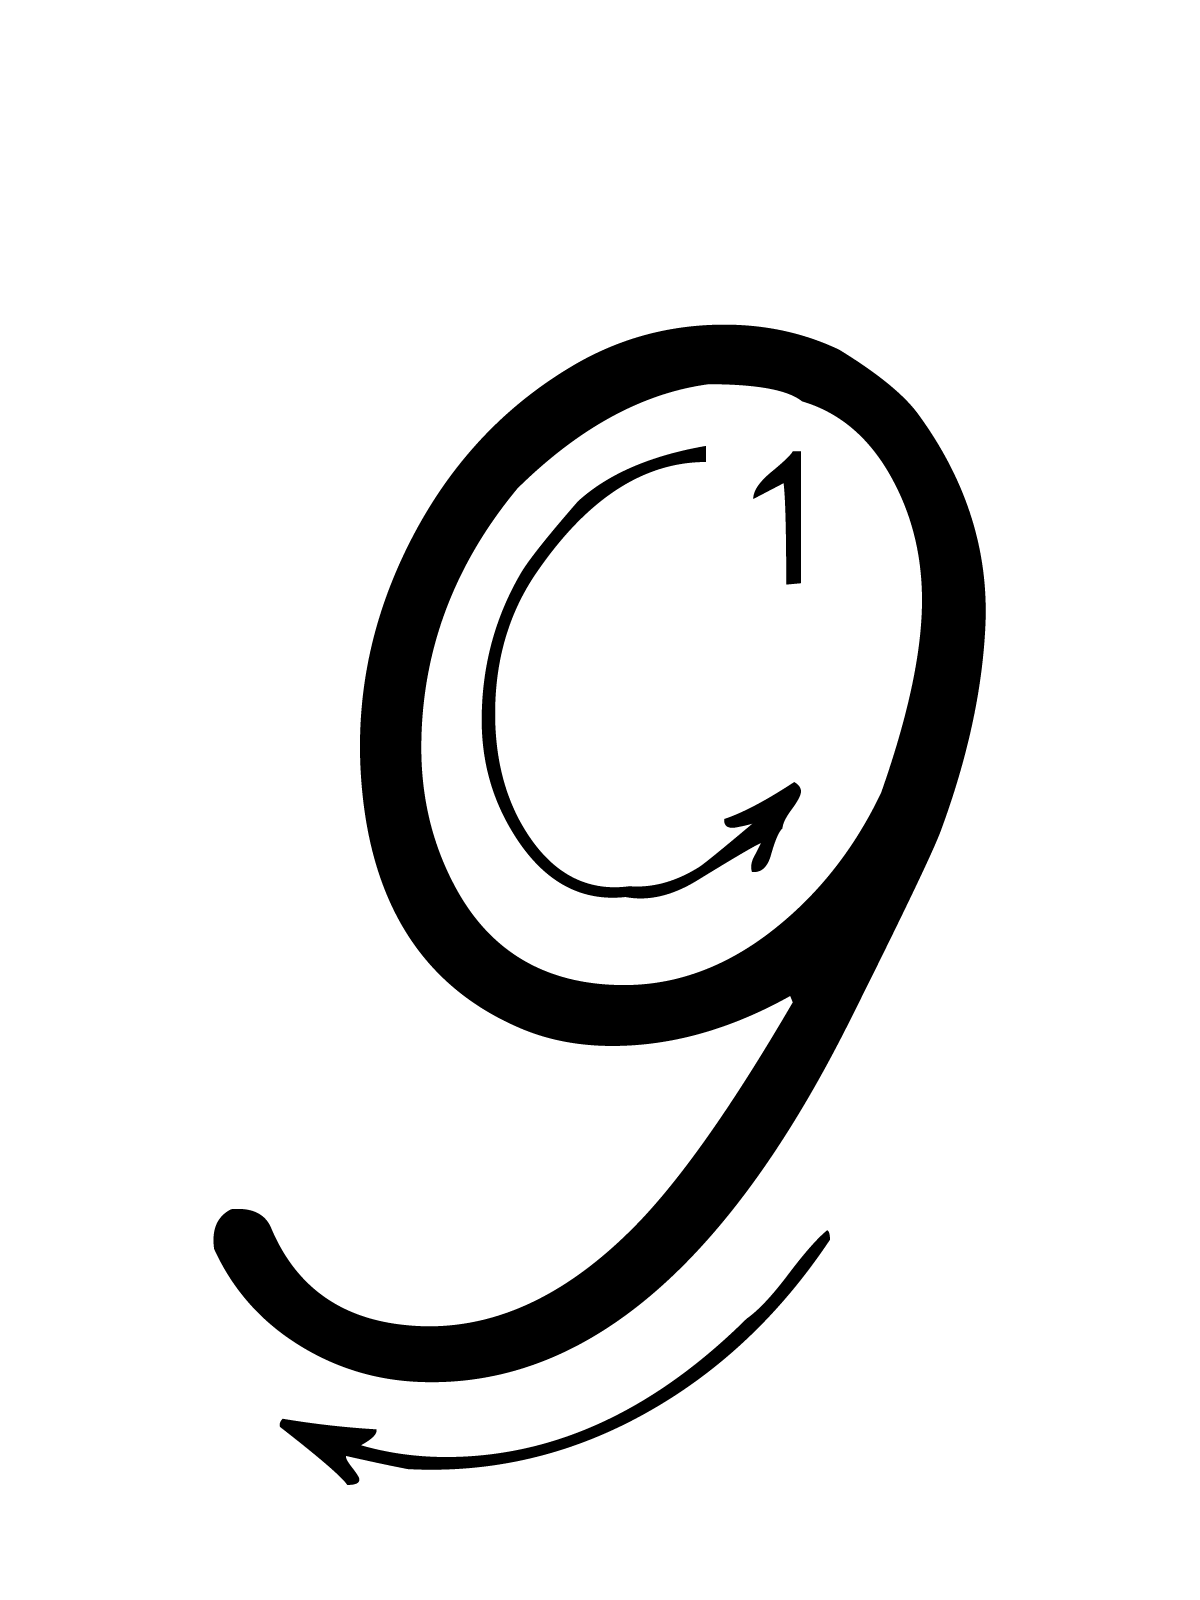 Letters and numbers - Number 9 (nine) with indications cursive movement